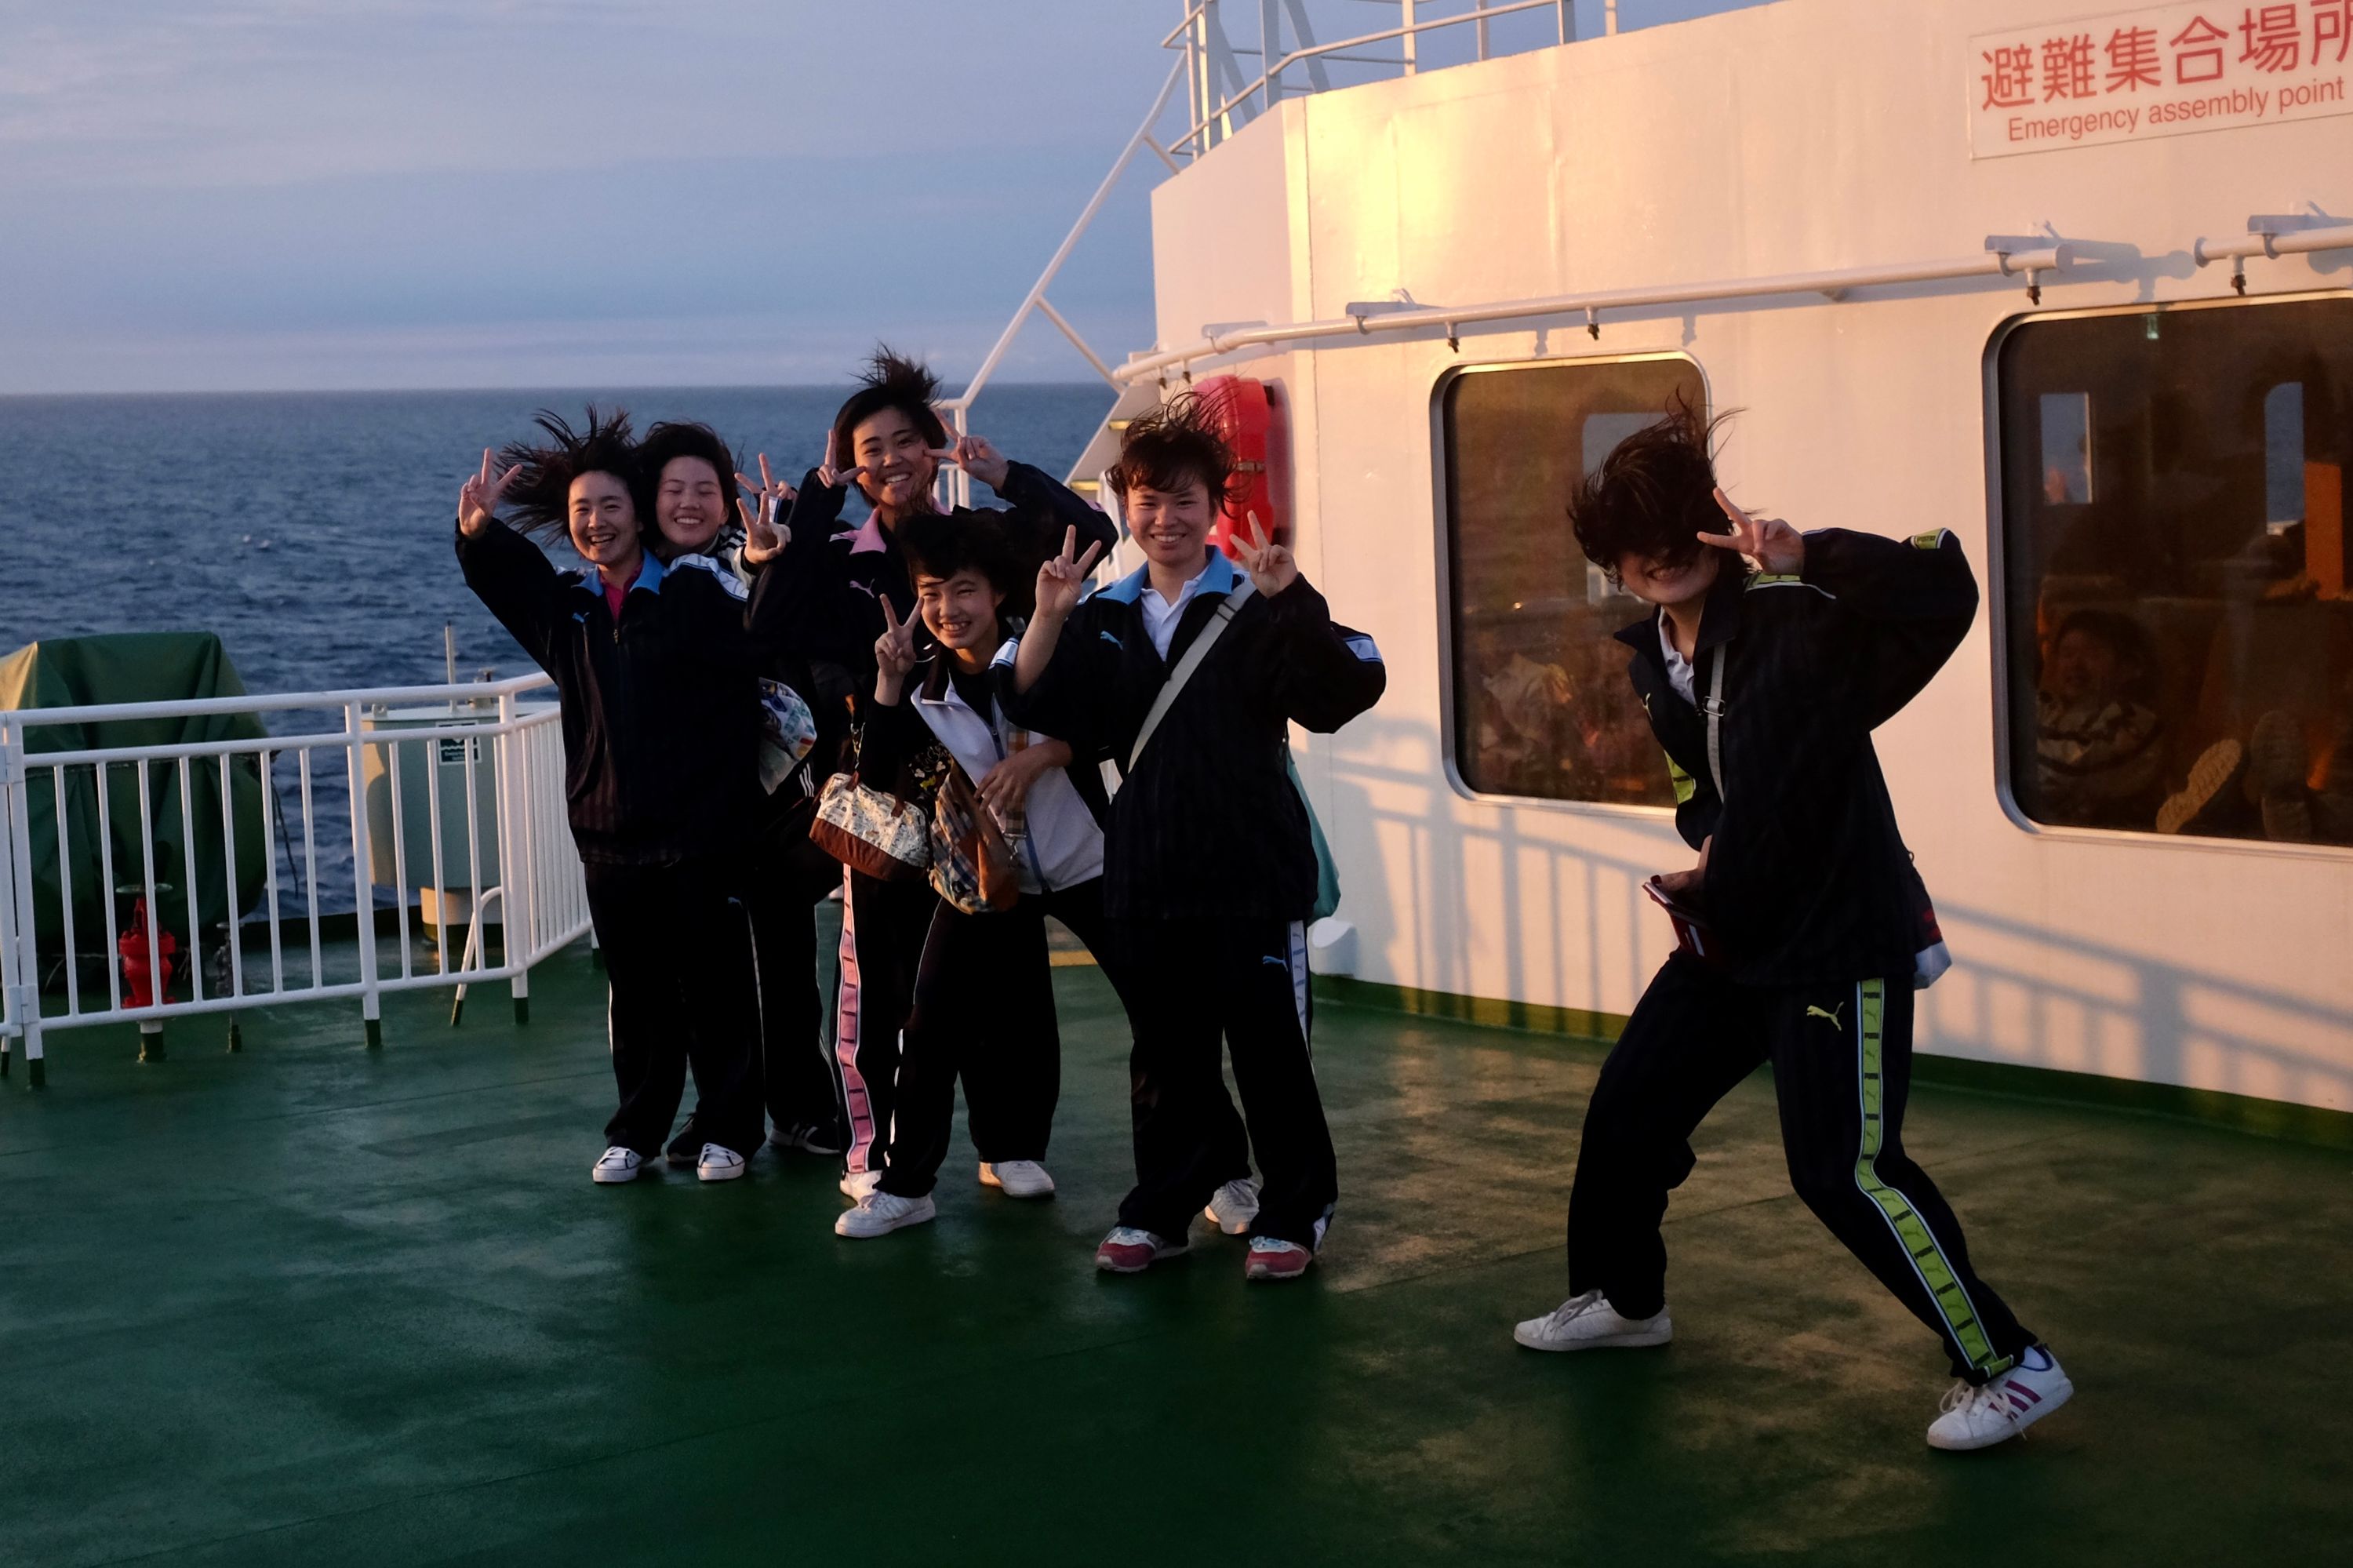 A group of girls on the same deck show V-signs into the camera, their hair tousled by what must be a very strong wind.